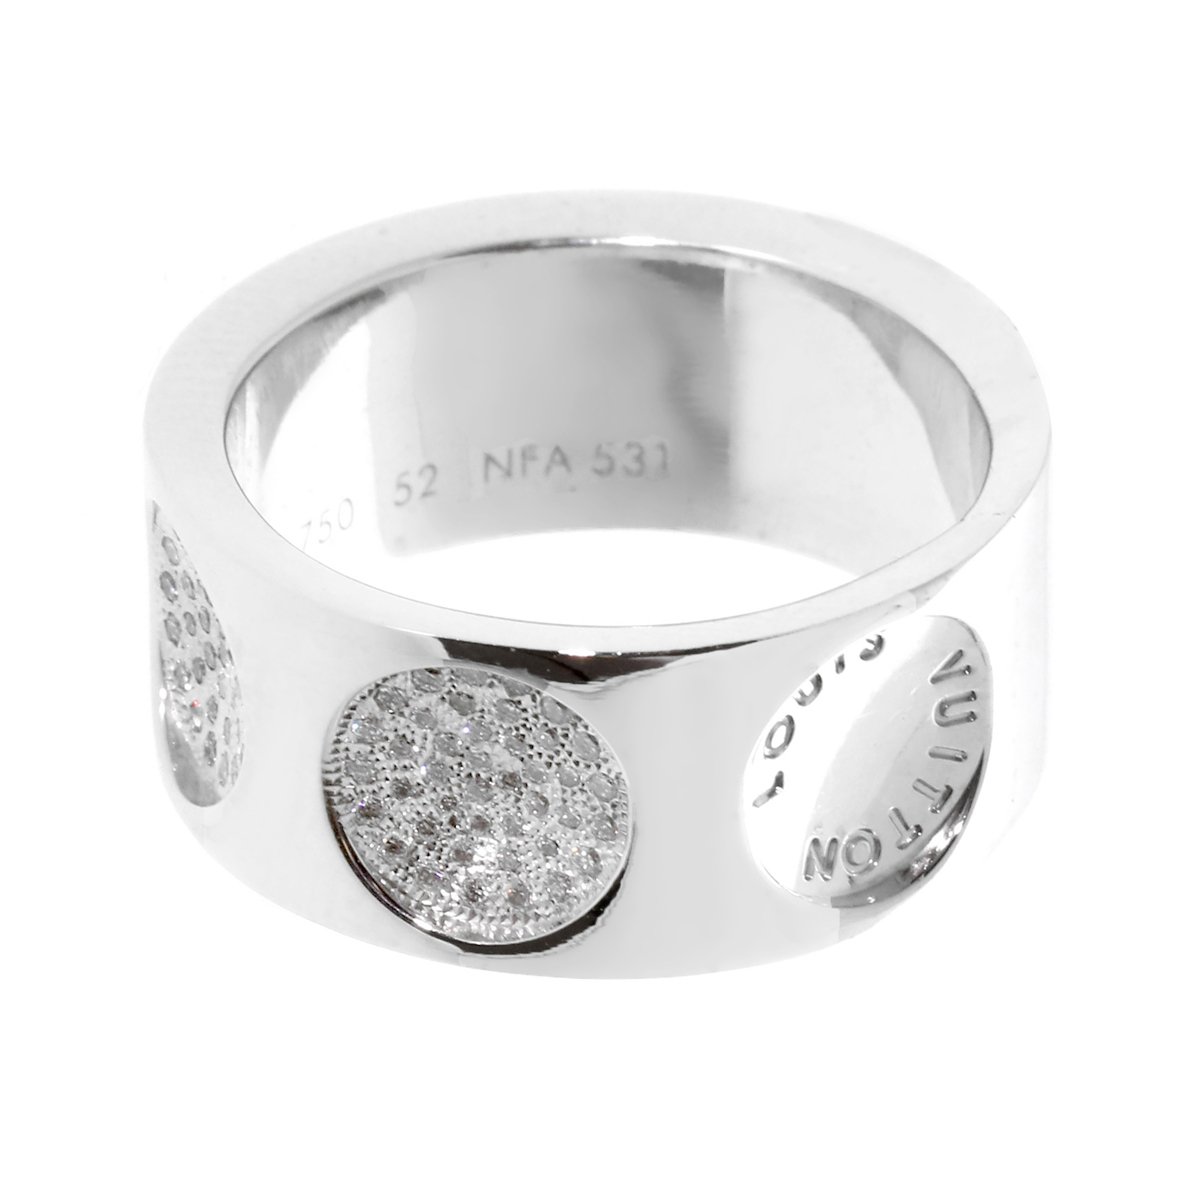 Compare prices for Small Empreinte ring in white gold with